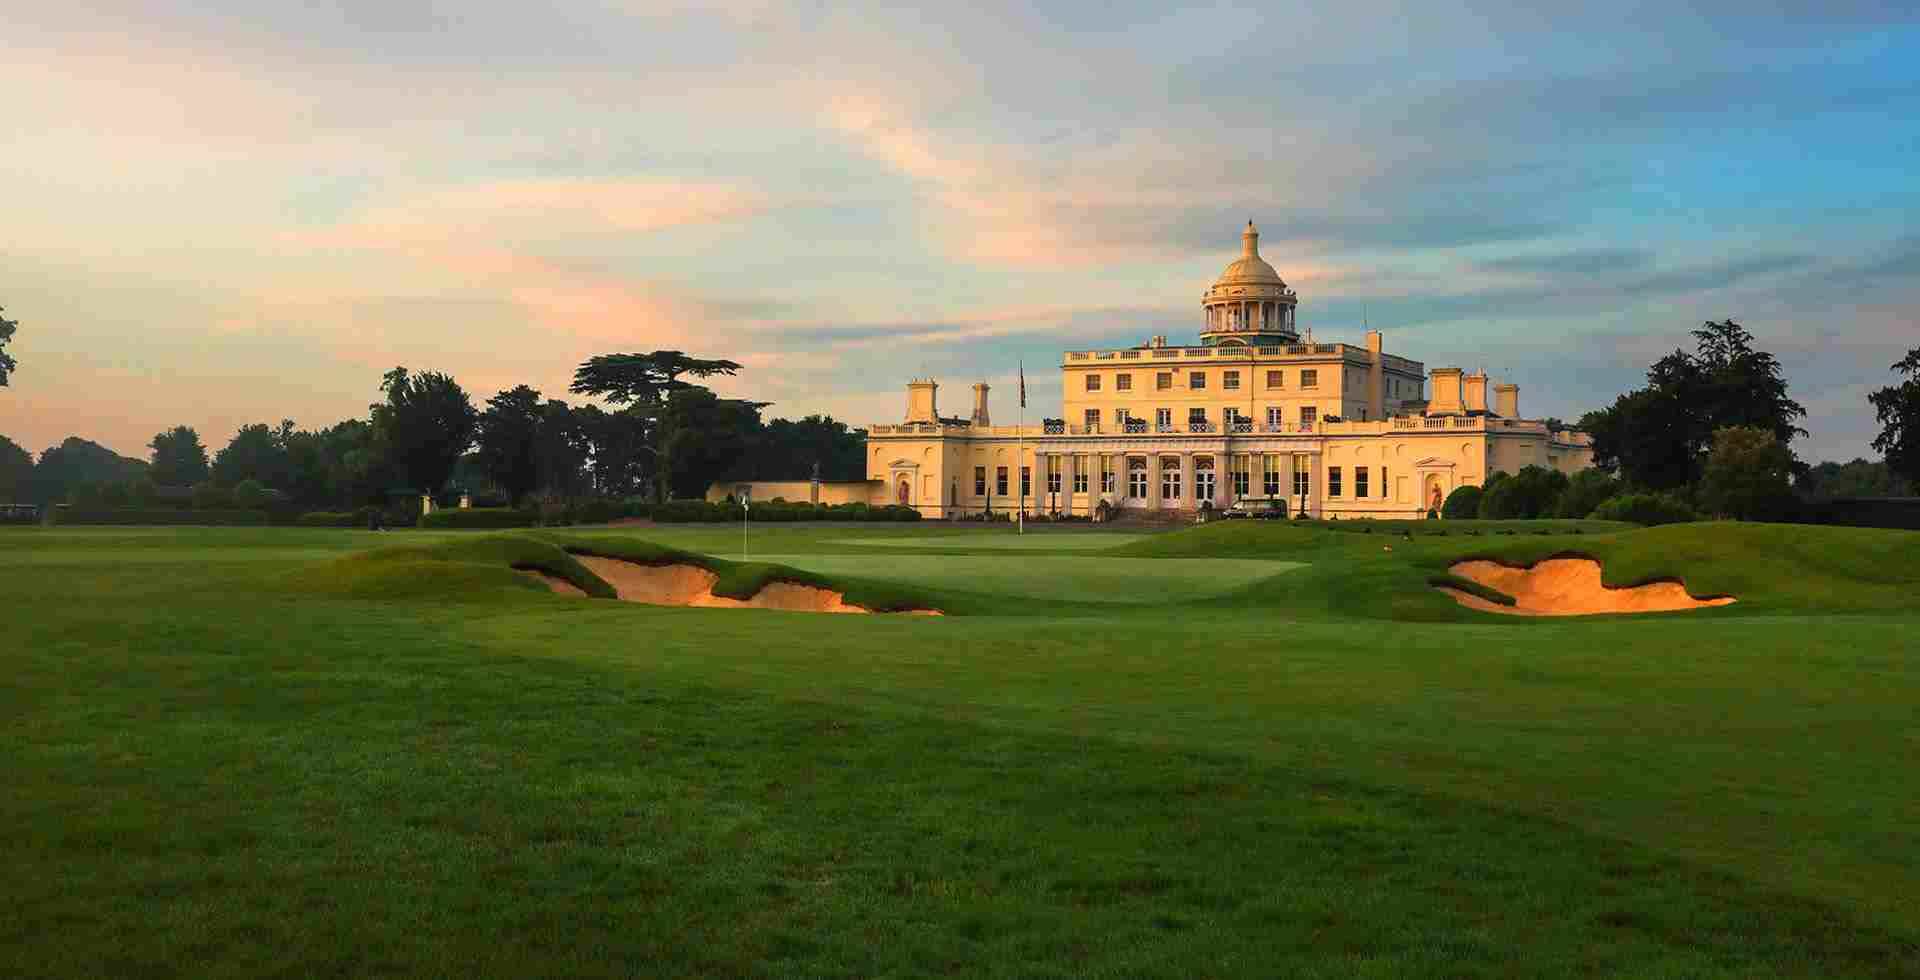 Stoke Park Review: A Celeb-Worthy Retreat With an A List